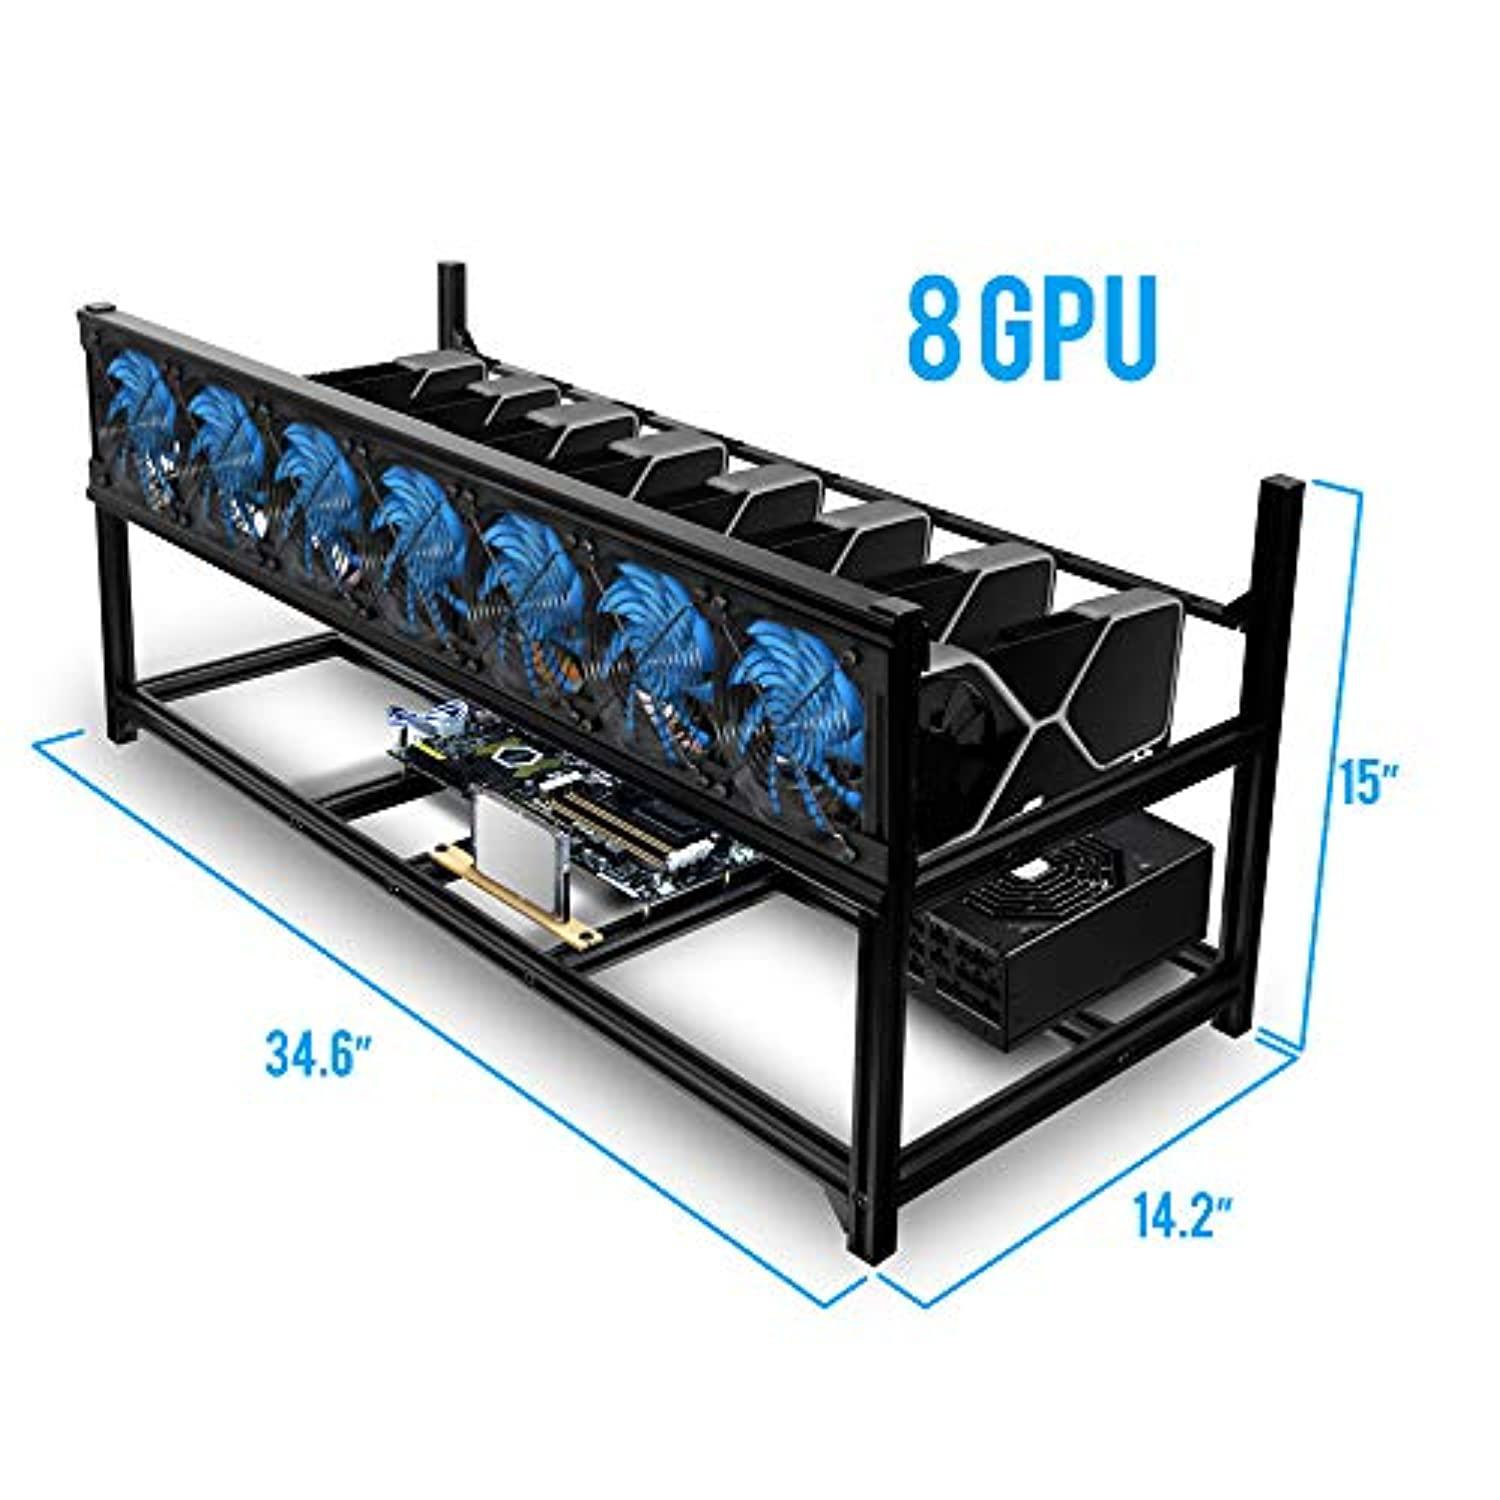 kingwin bitcoin miner rig case w/ 6, or 8 gpu mining stackable frame - expert crypto mining rack w/ placement for motherboard